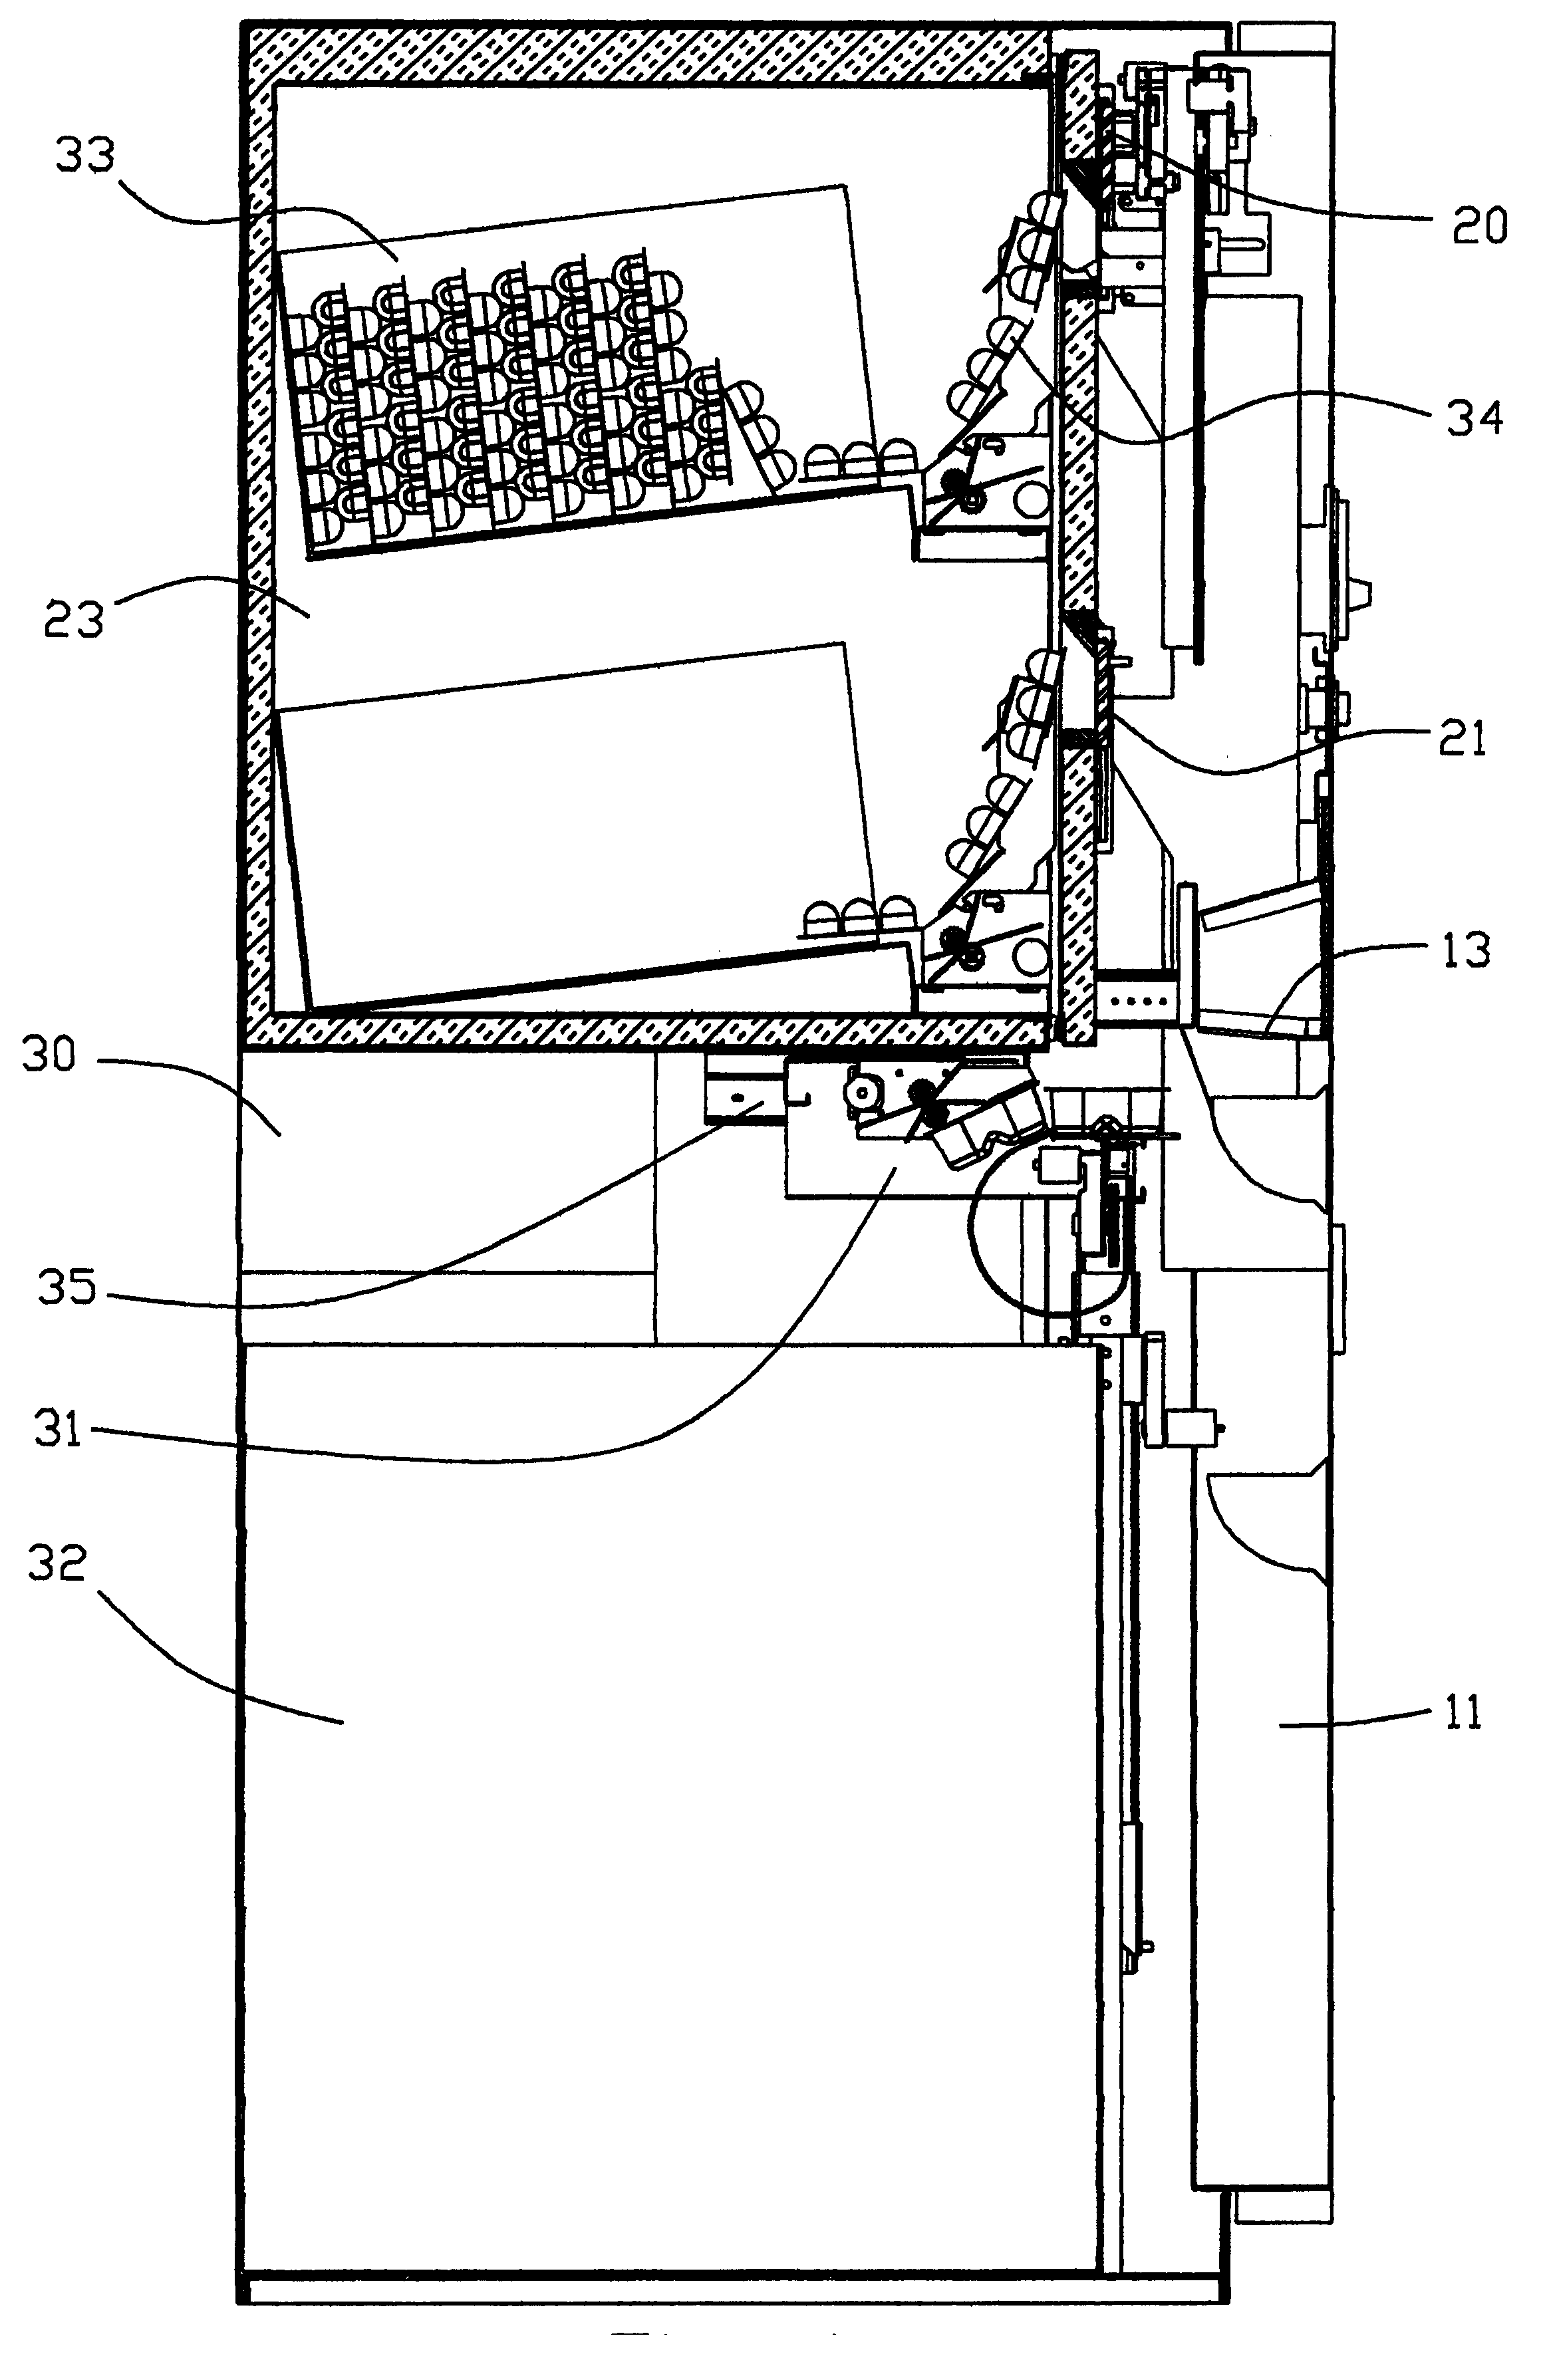 Method and apparatus for preparing and dispensing a combination of food products in a vending machine